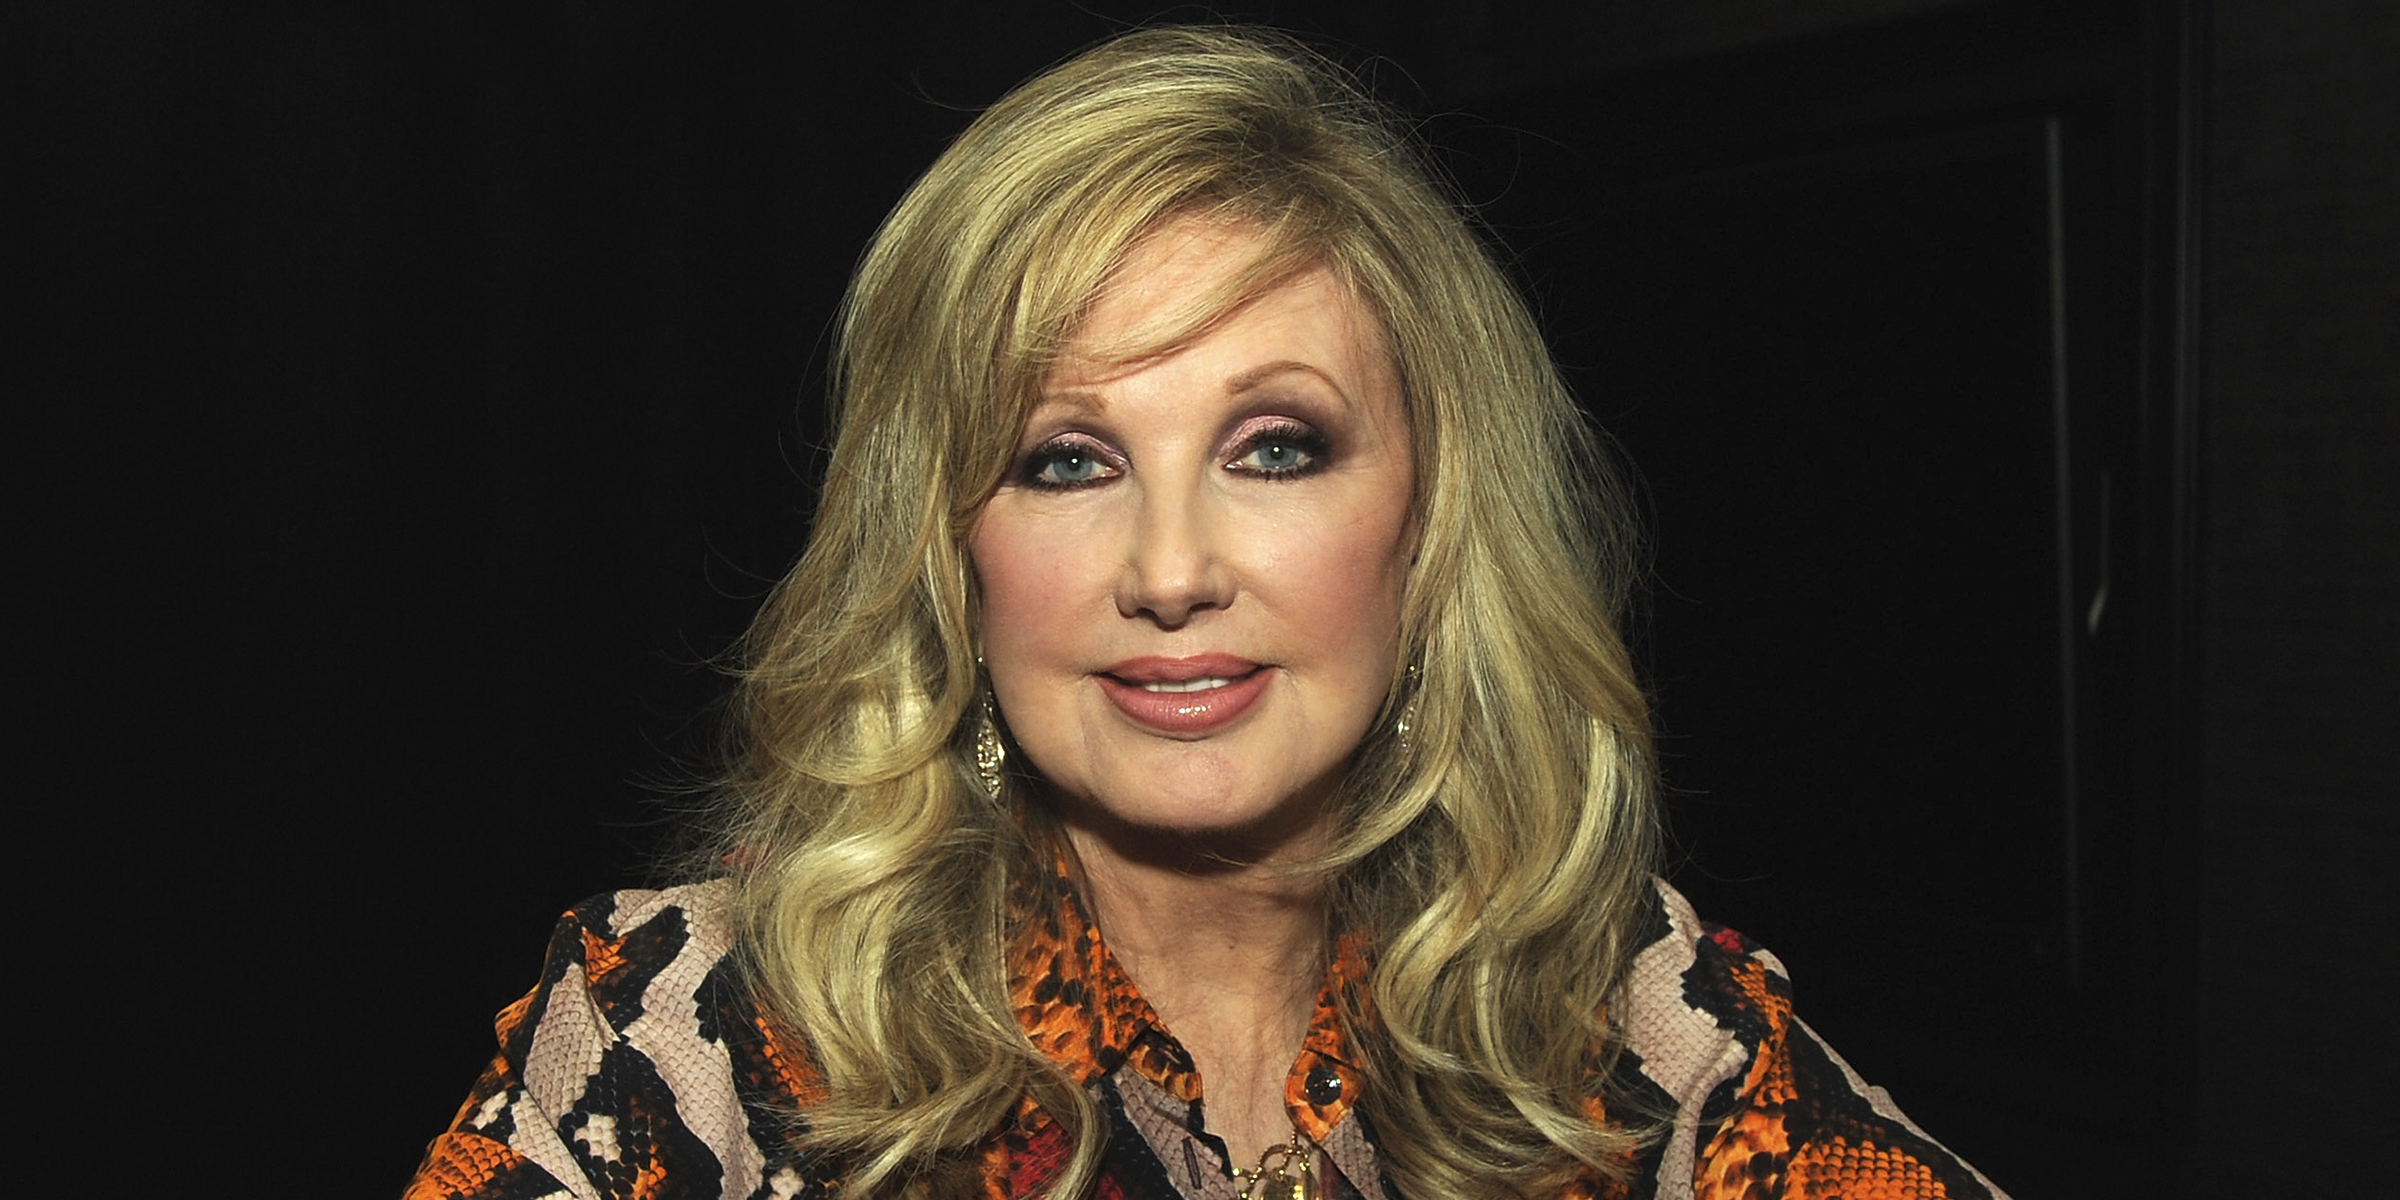 Morgan Fairchild attends the Chiller Theatre Expo Spring 2019 at Parsippany Hilton, on April 26, 2019, in Parsippany, New Jersey. | Source: Getty Images